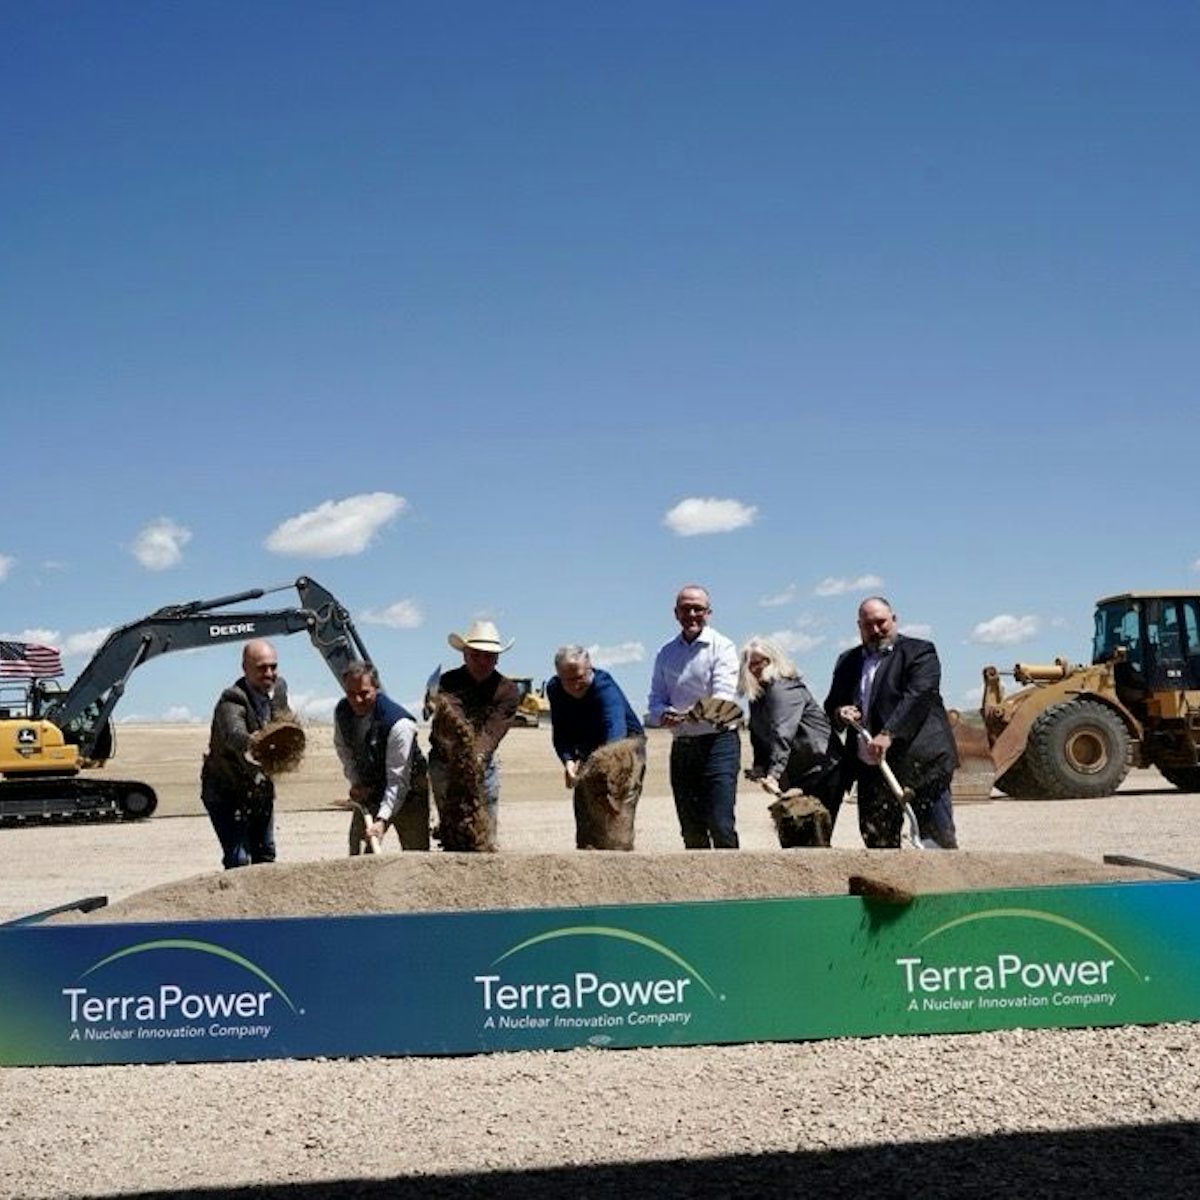  TerraPower / Bill Gates Reactor Company Breaks Ground For Wyoming Nuclear Power Plant 